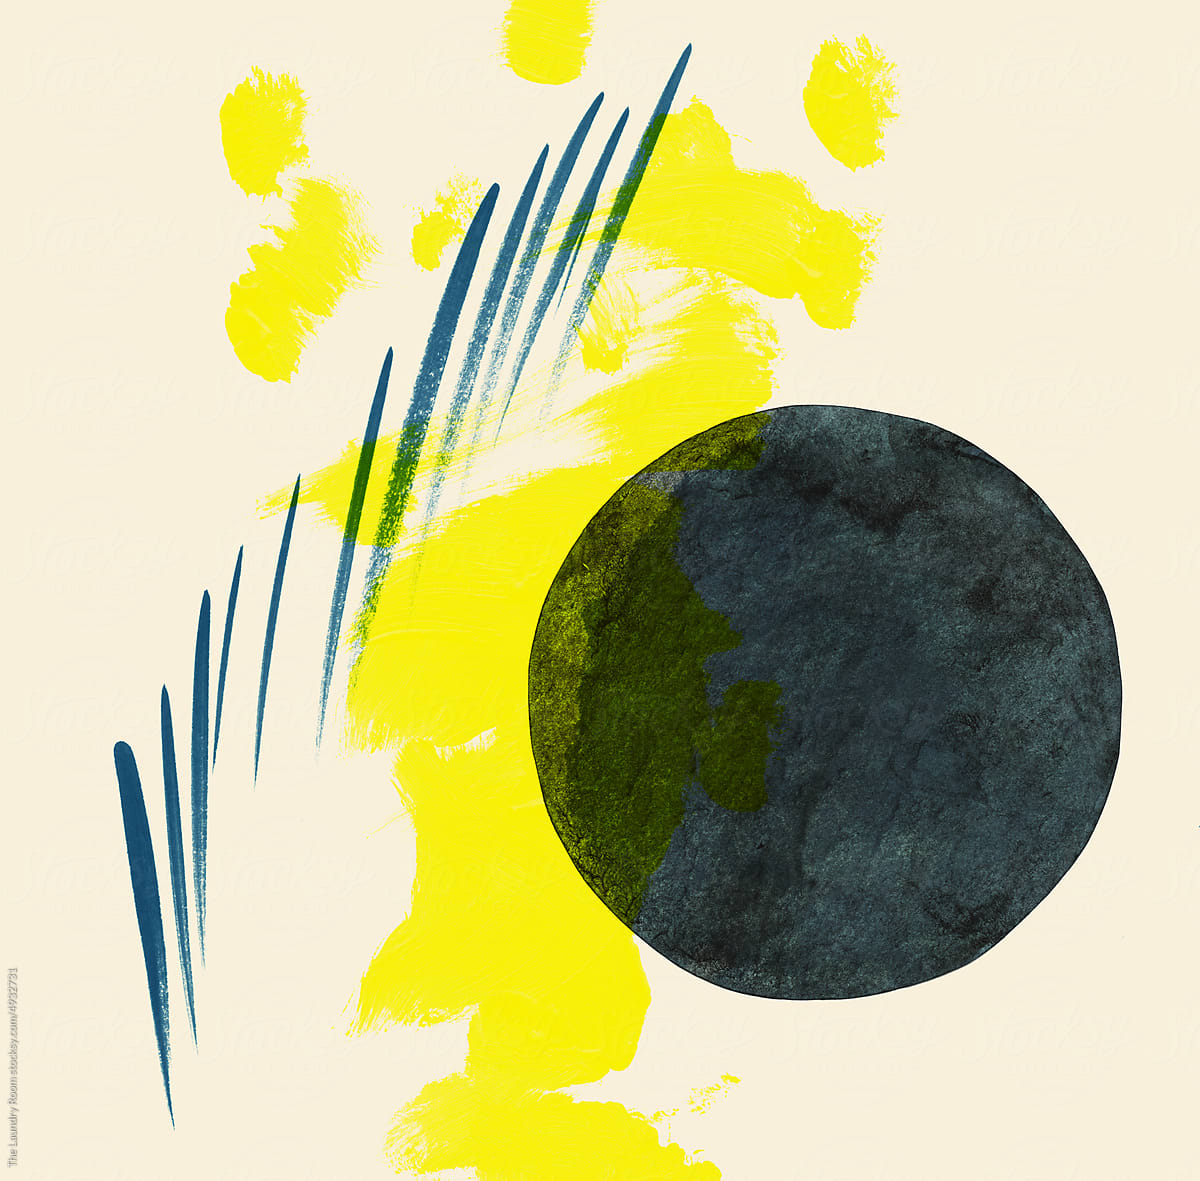 Abstract Circle with Yellow and Calligraphic Lines